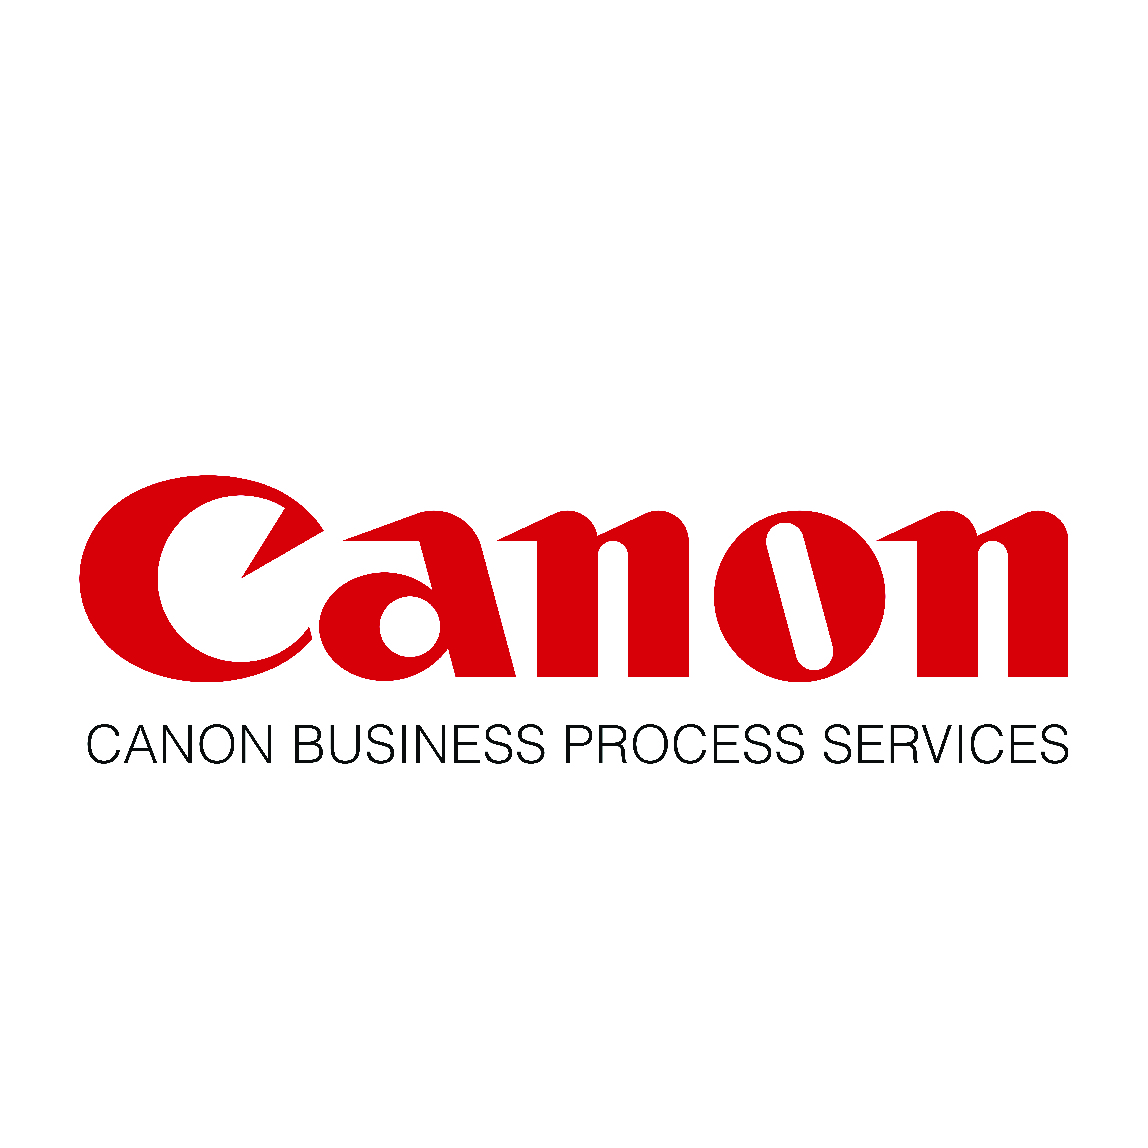 CANON BUSINESS